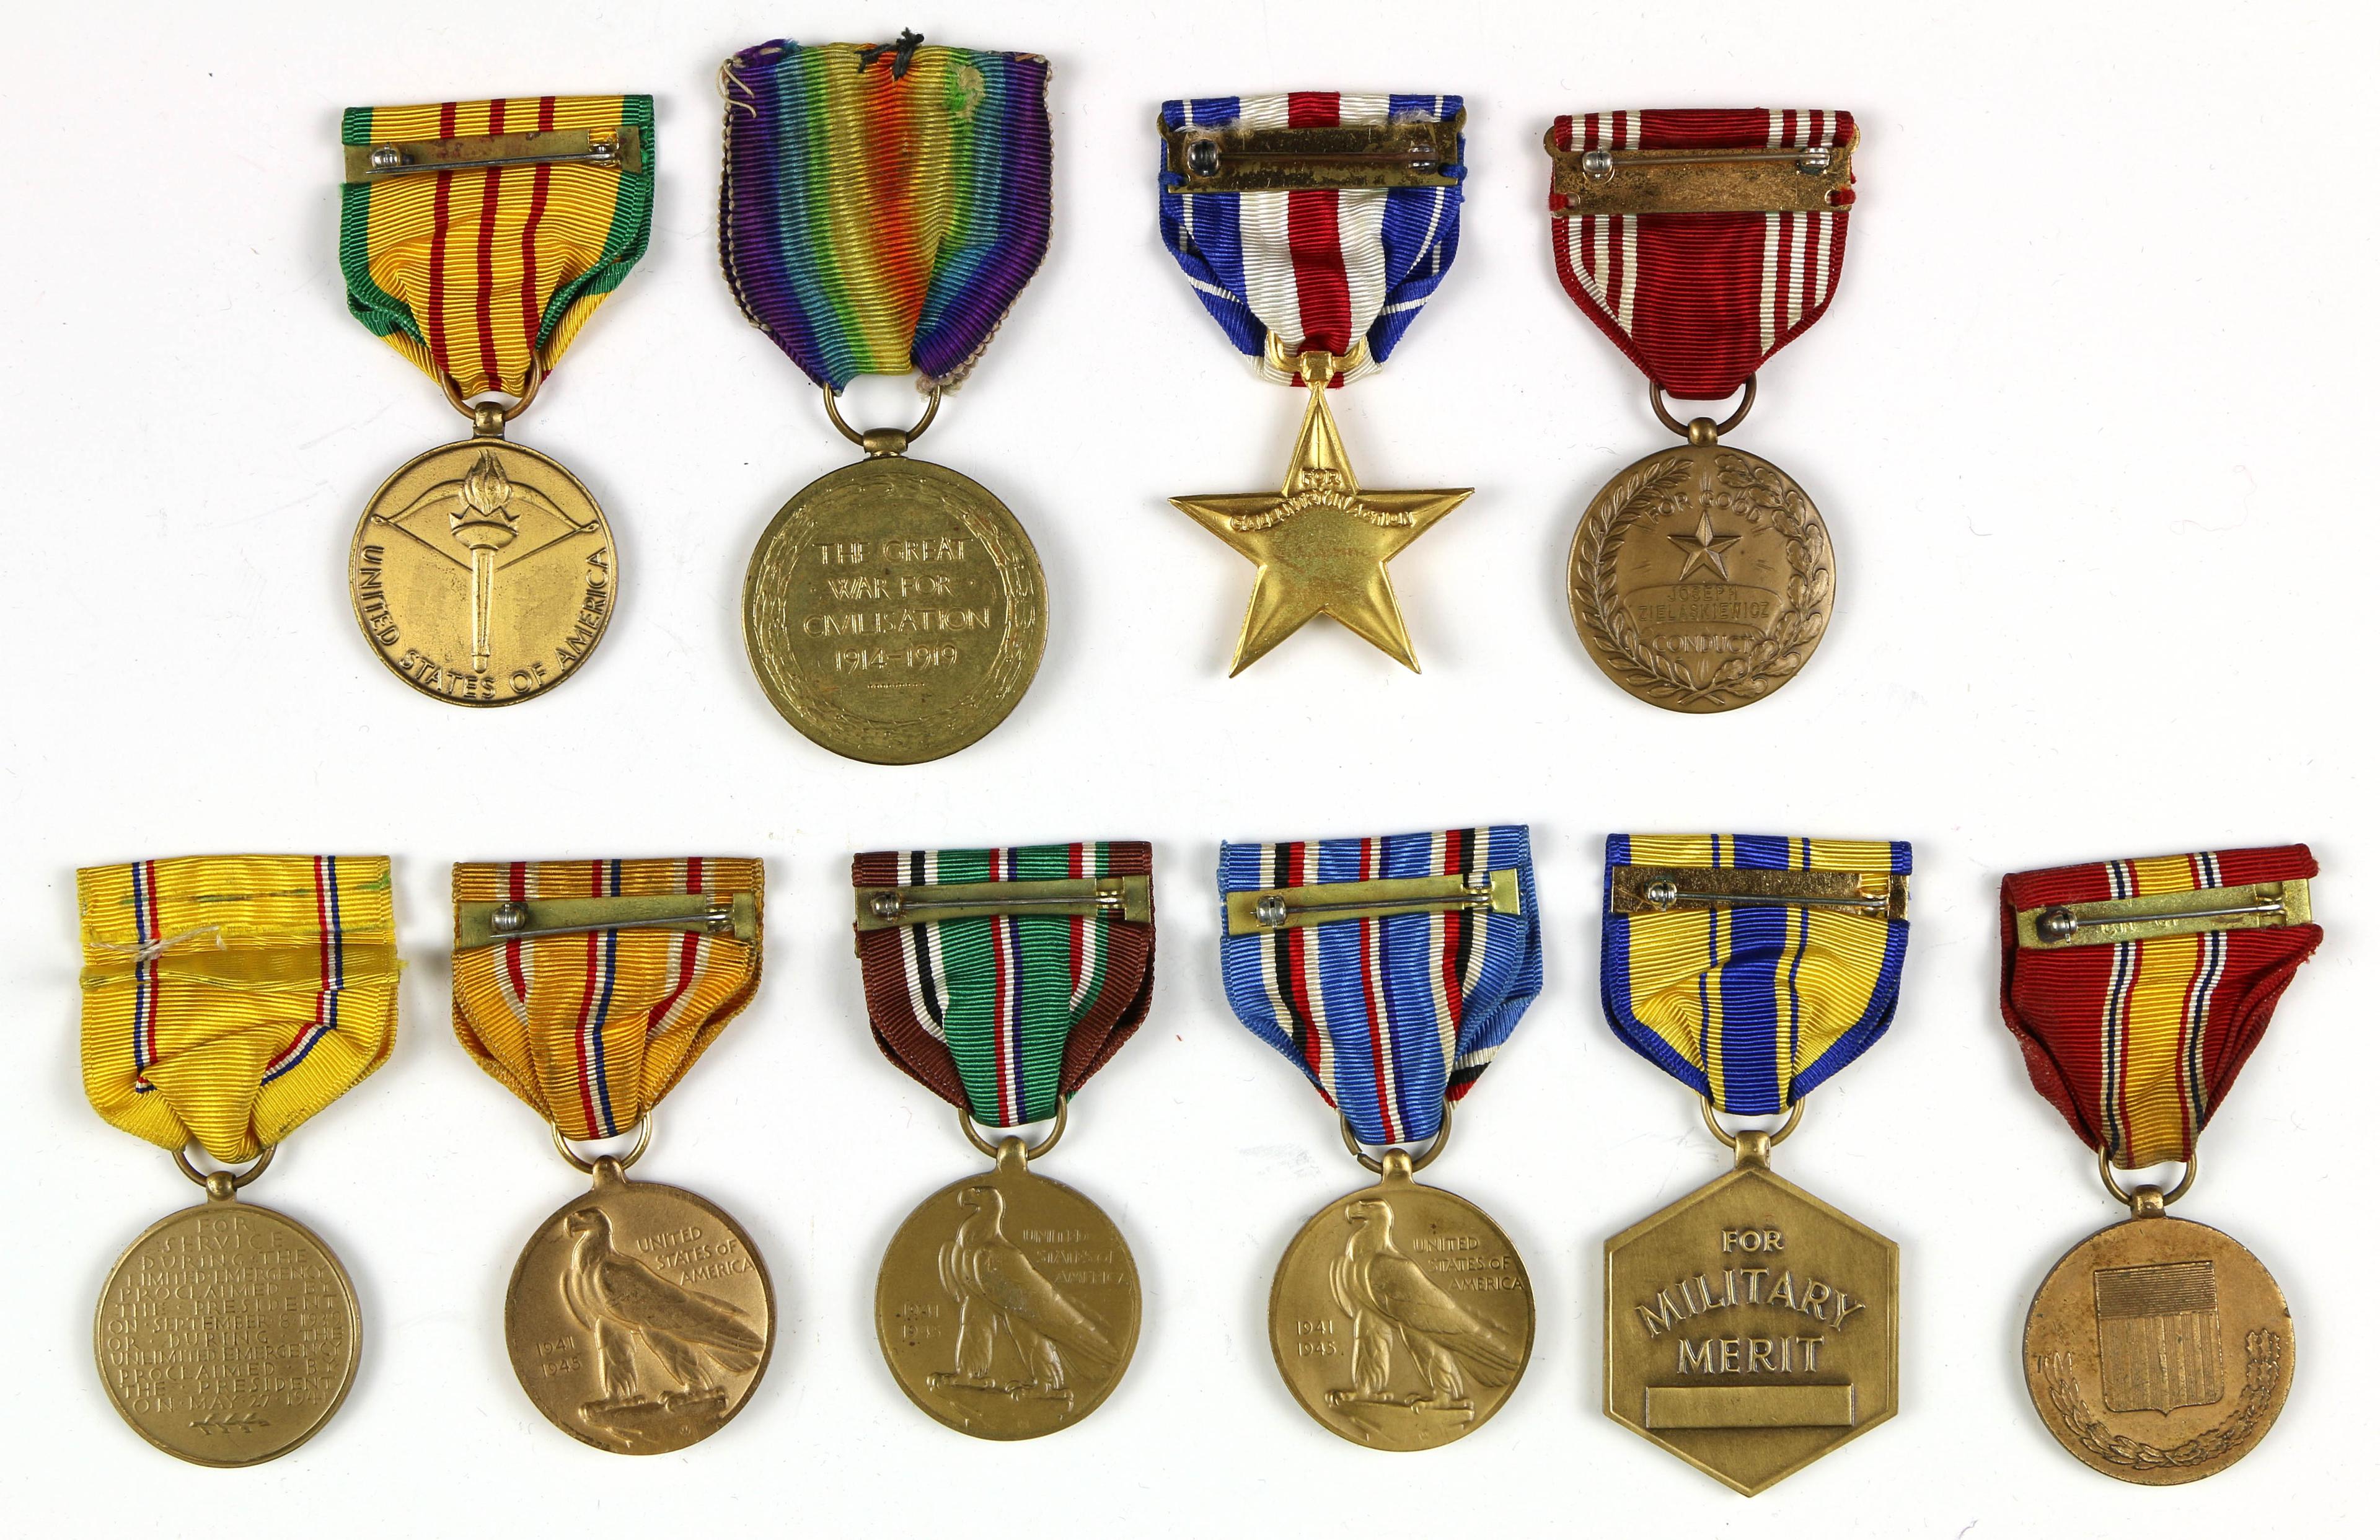 U.S. Medals With Ribbons (10)